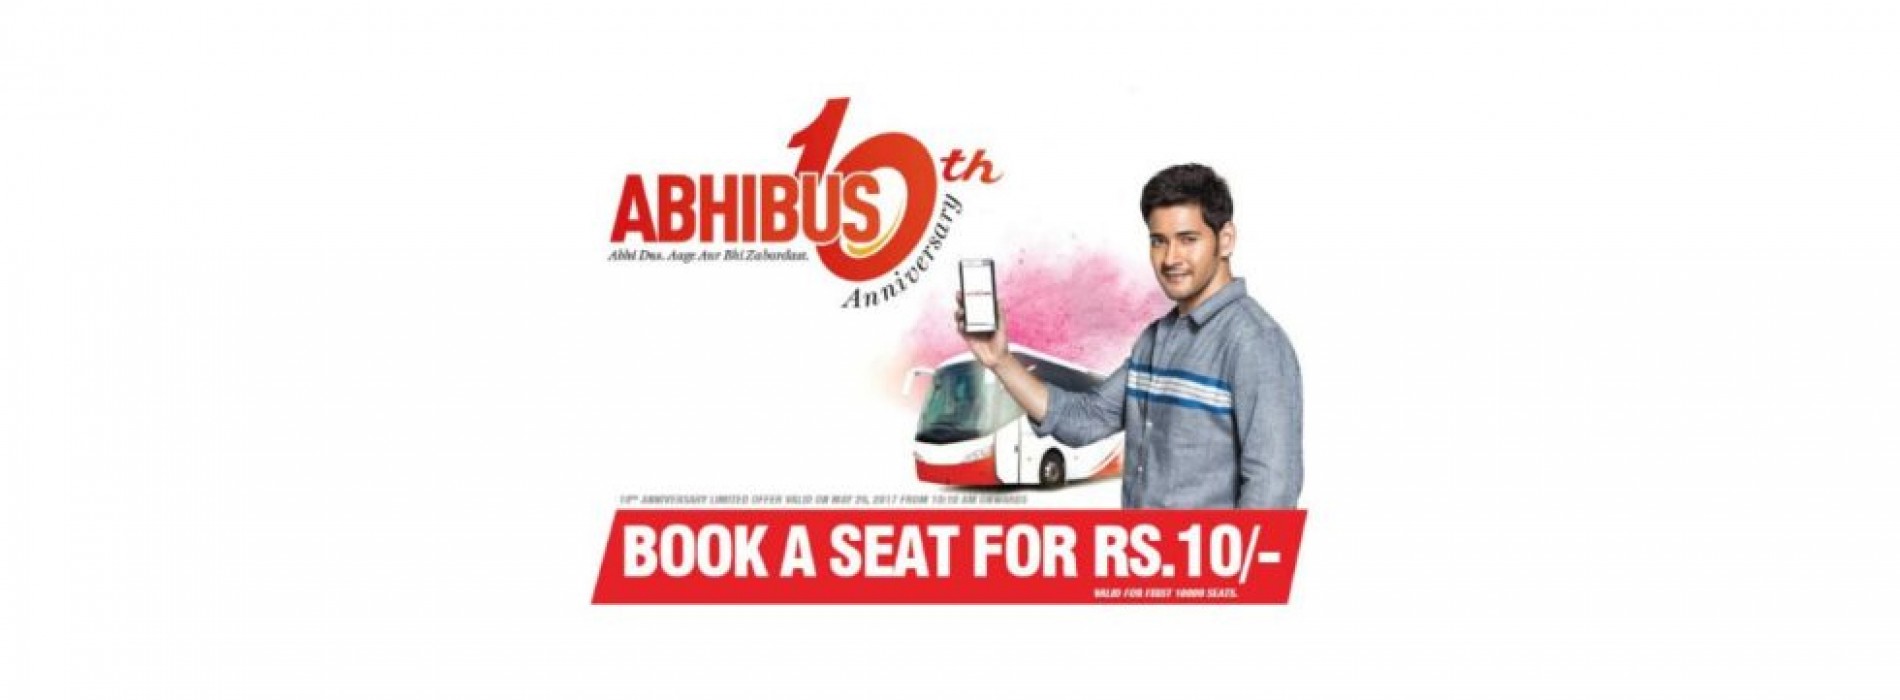 Abhibus introduces ‘Movies on Board’ for bus travellers